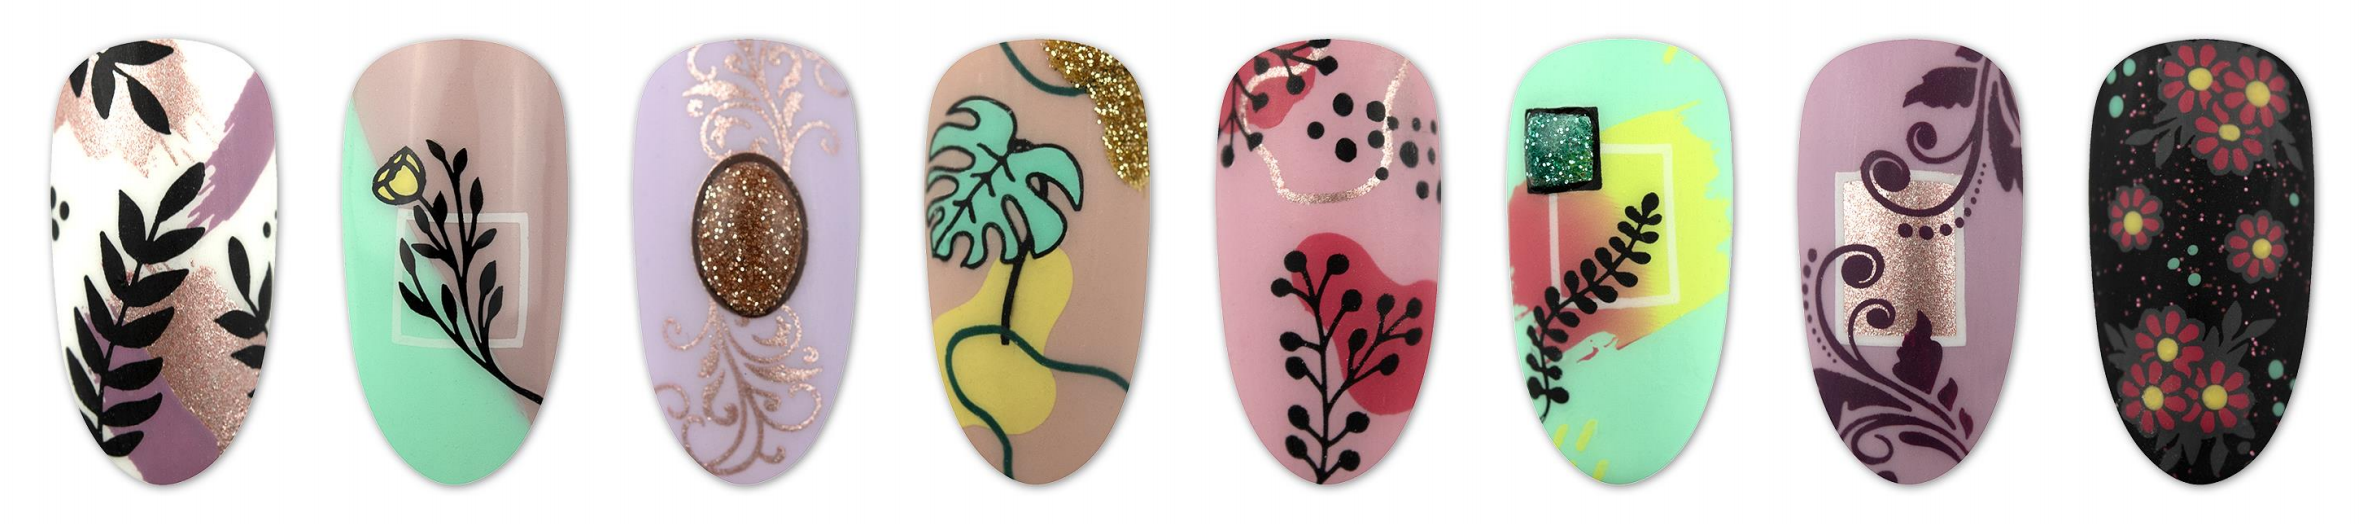 YOURS Spring Fever Double Sided Stamping Stamping Polish and Eco Elements Nail Tip Designs